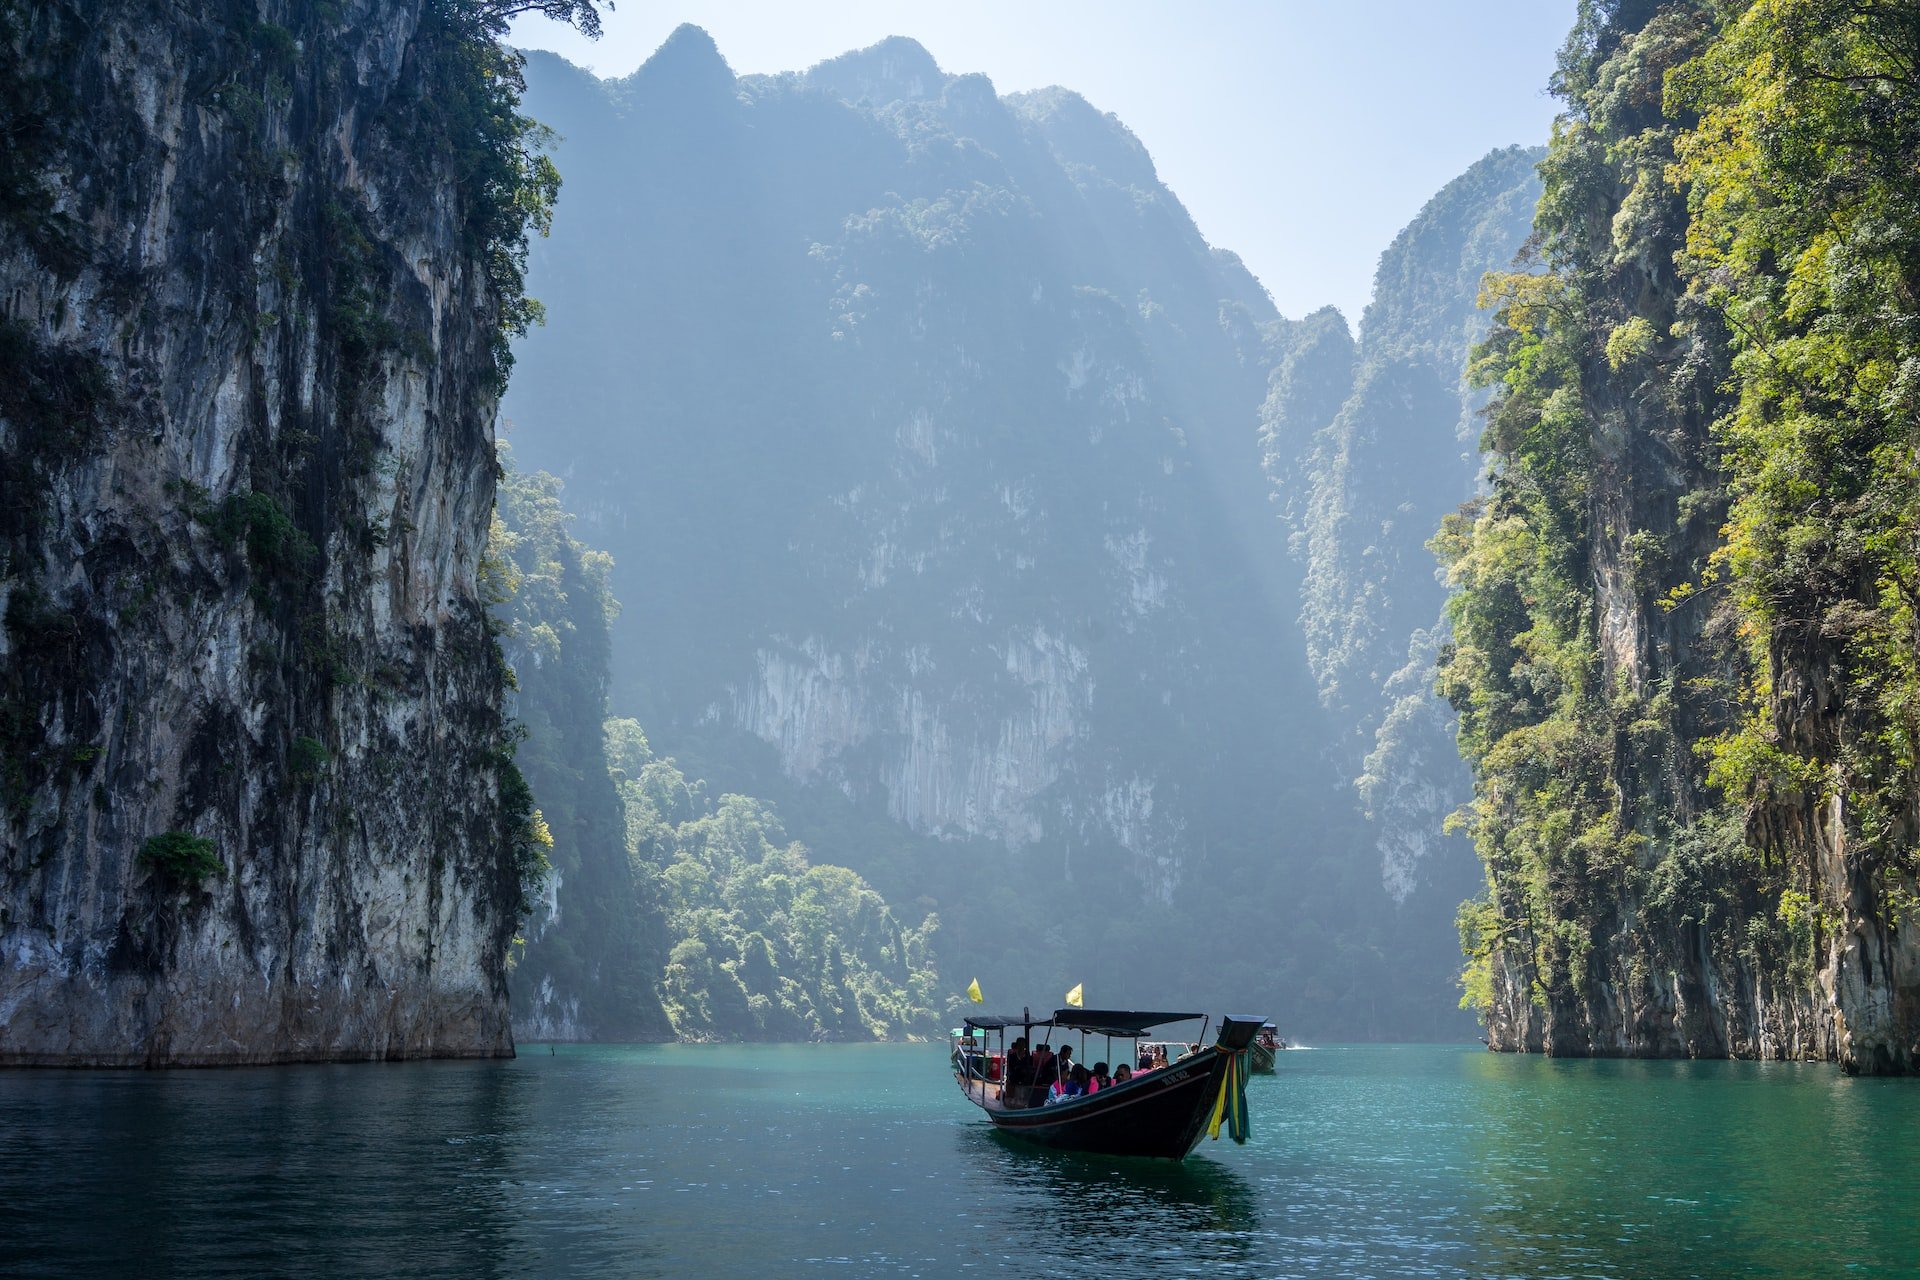 A boat floats on the water between two looming cliff faces in Khao Sok National Park, Khlong Sok, Thailand.